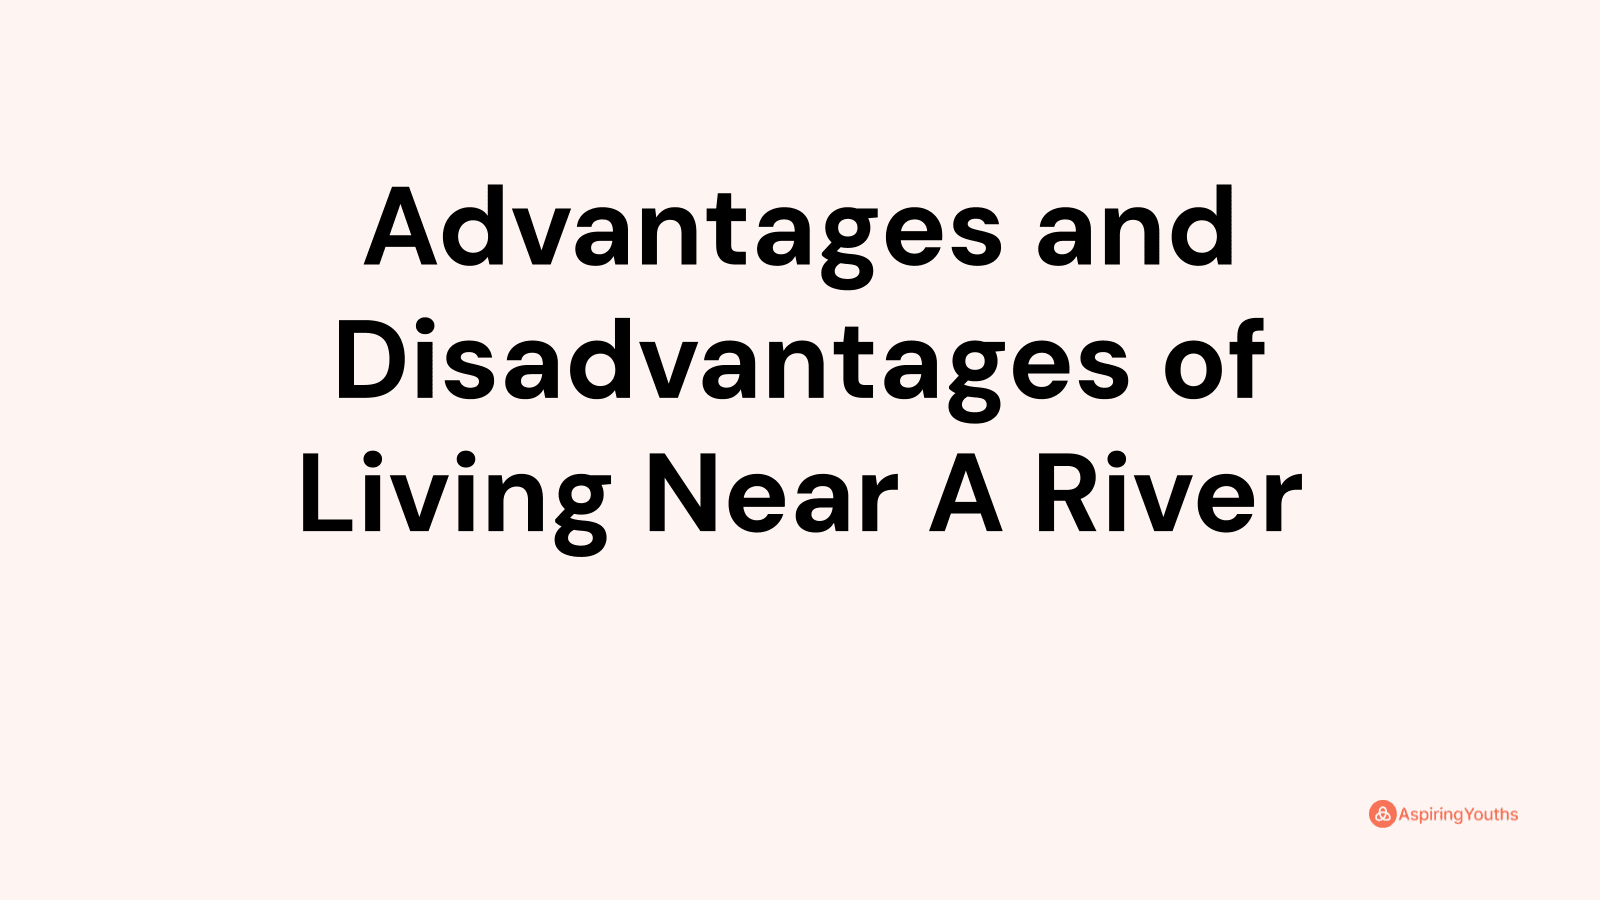 Advantages and disadvantages of Living Near A River